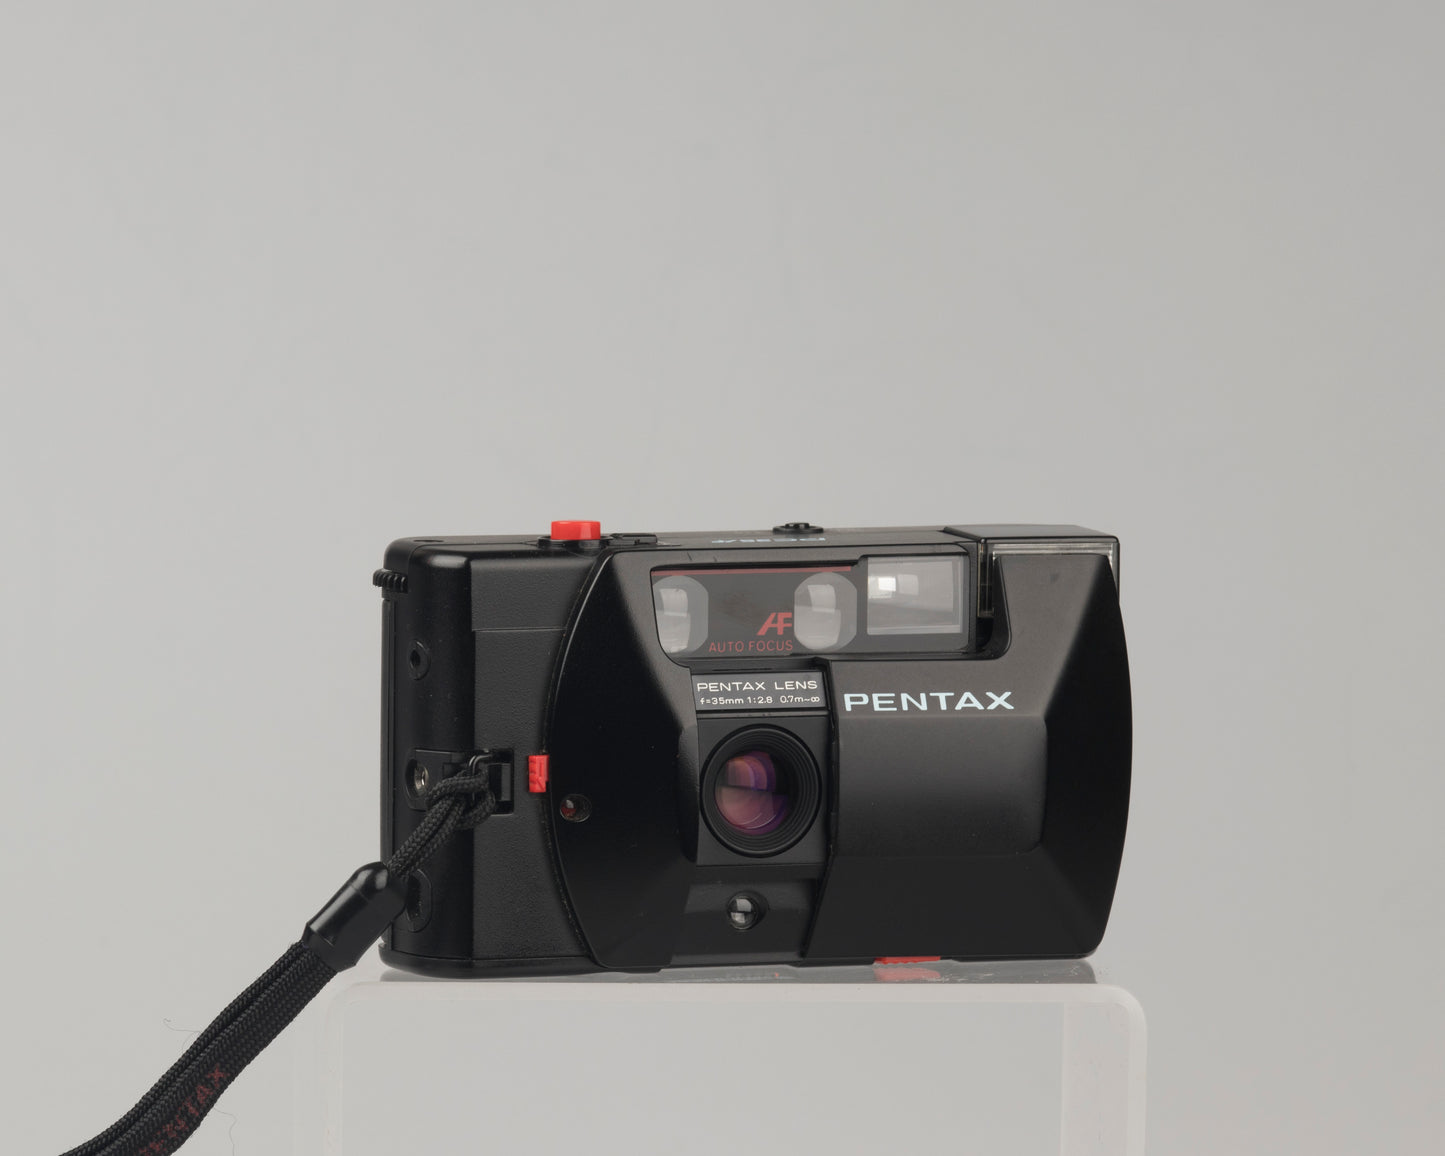 Pentax PC35-AF 35mm camera with rare PC35-Winder